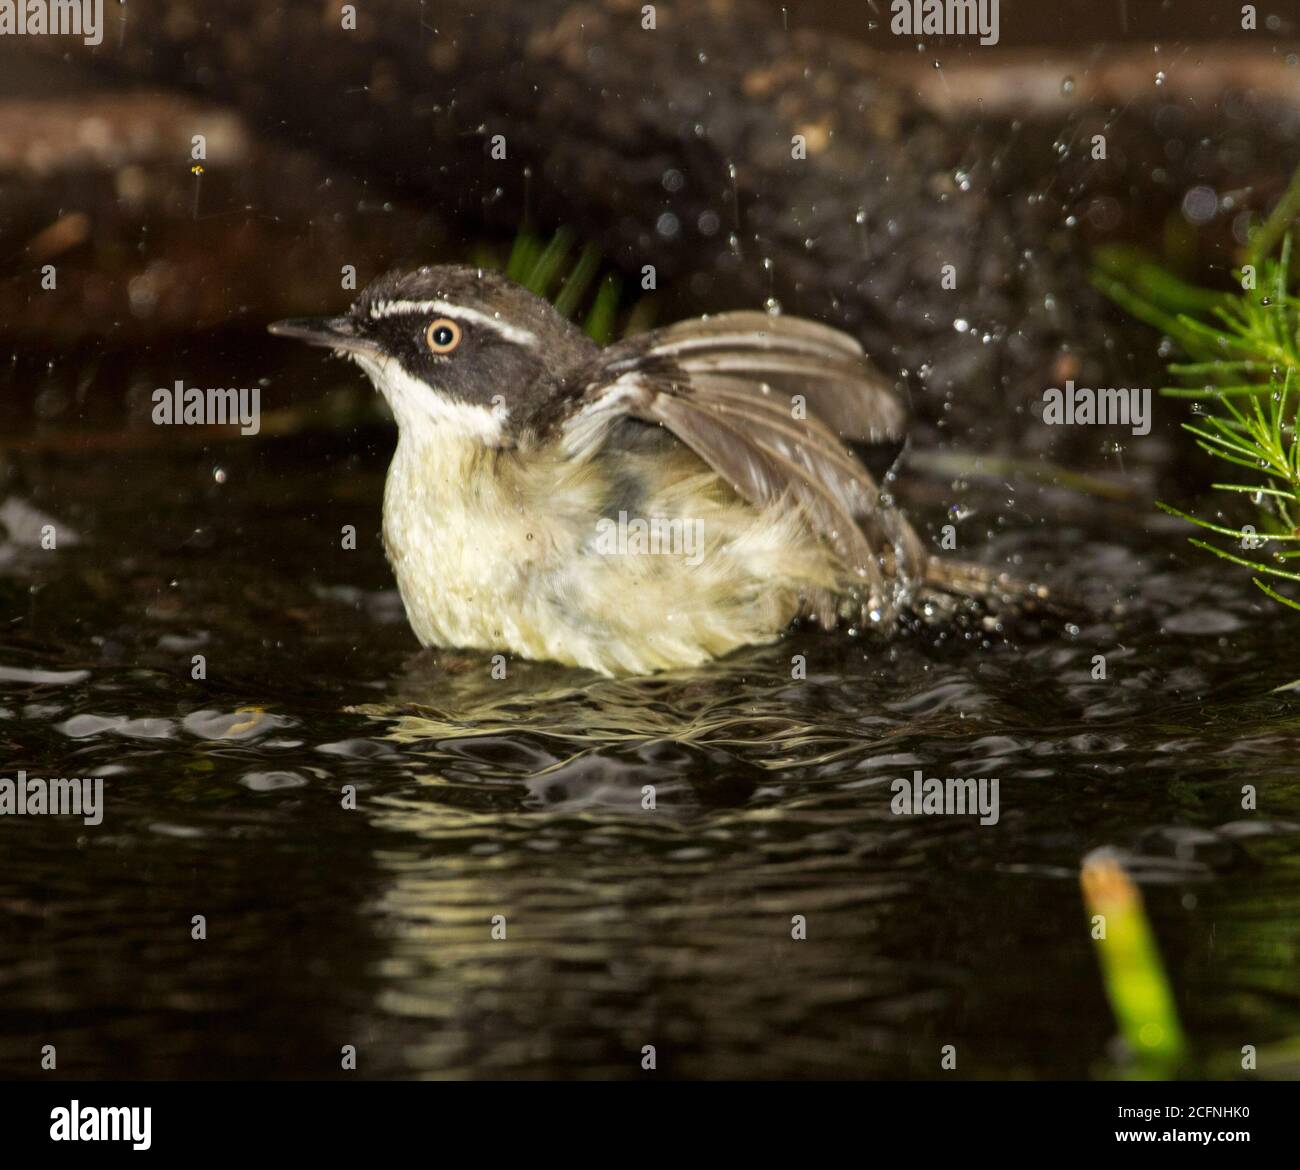 White-browed scrubwren, Sericornis frontalis, bathing in water of small garden pond / bird bath with wings flapping and water spraying into the air Stock Photo